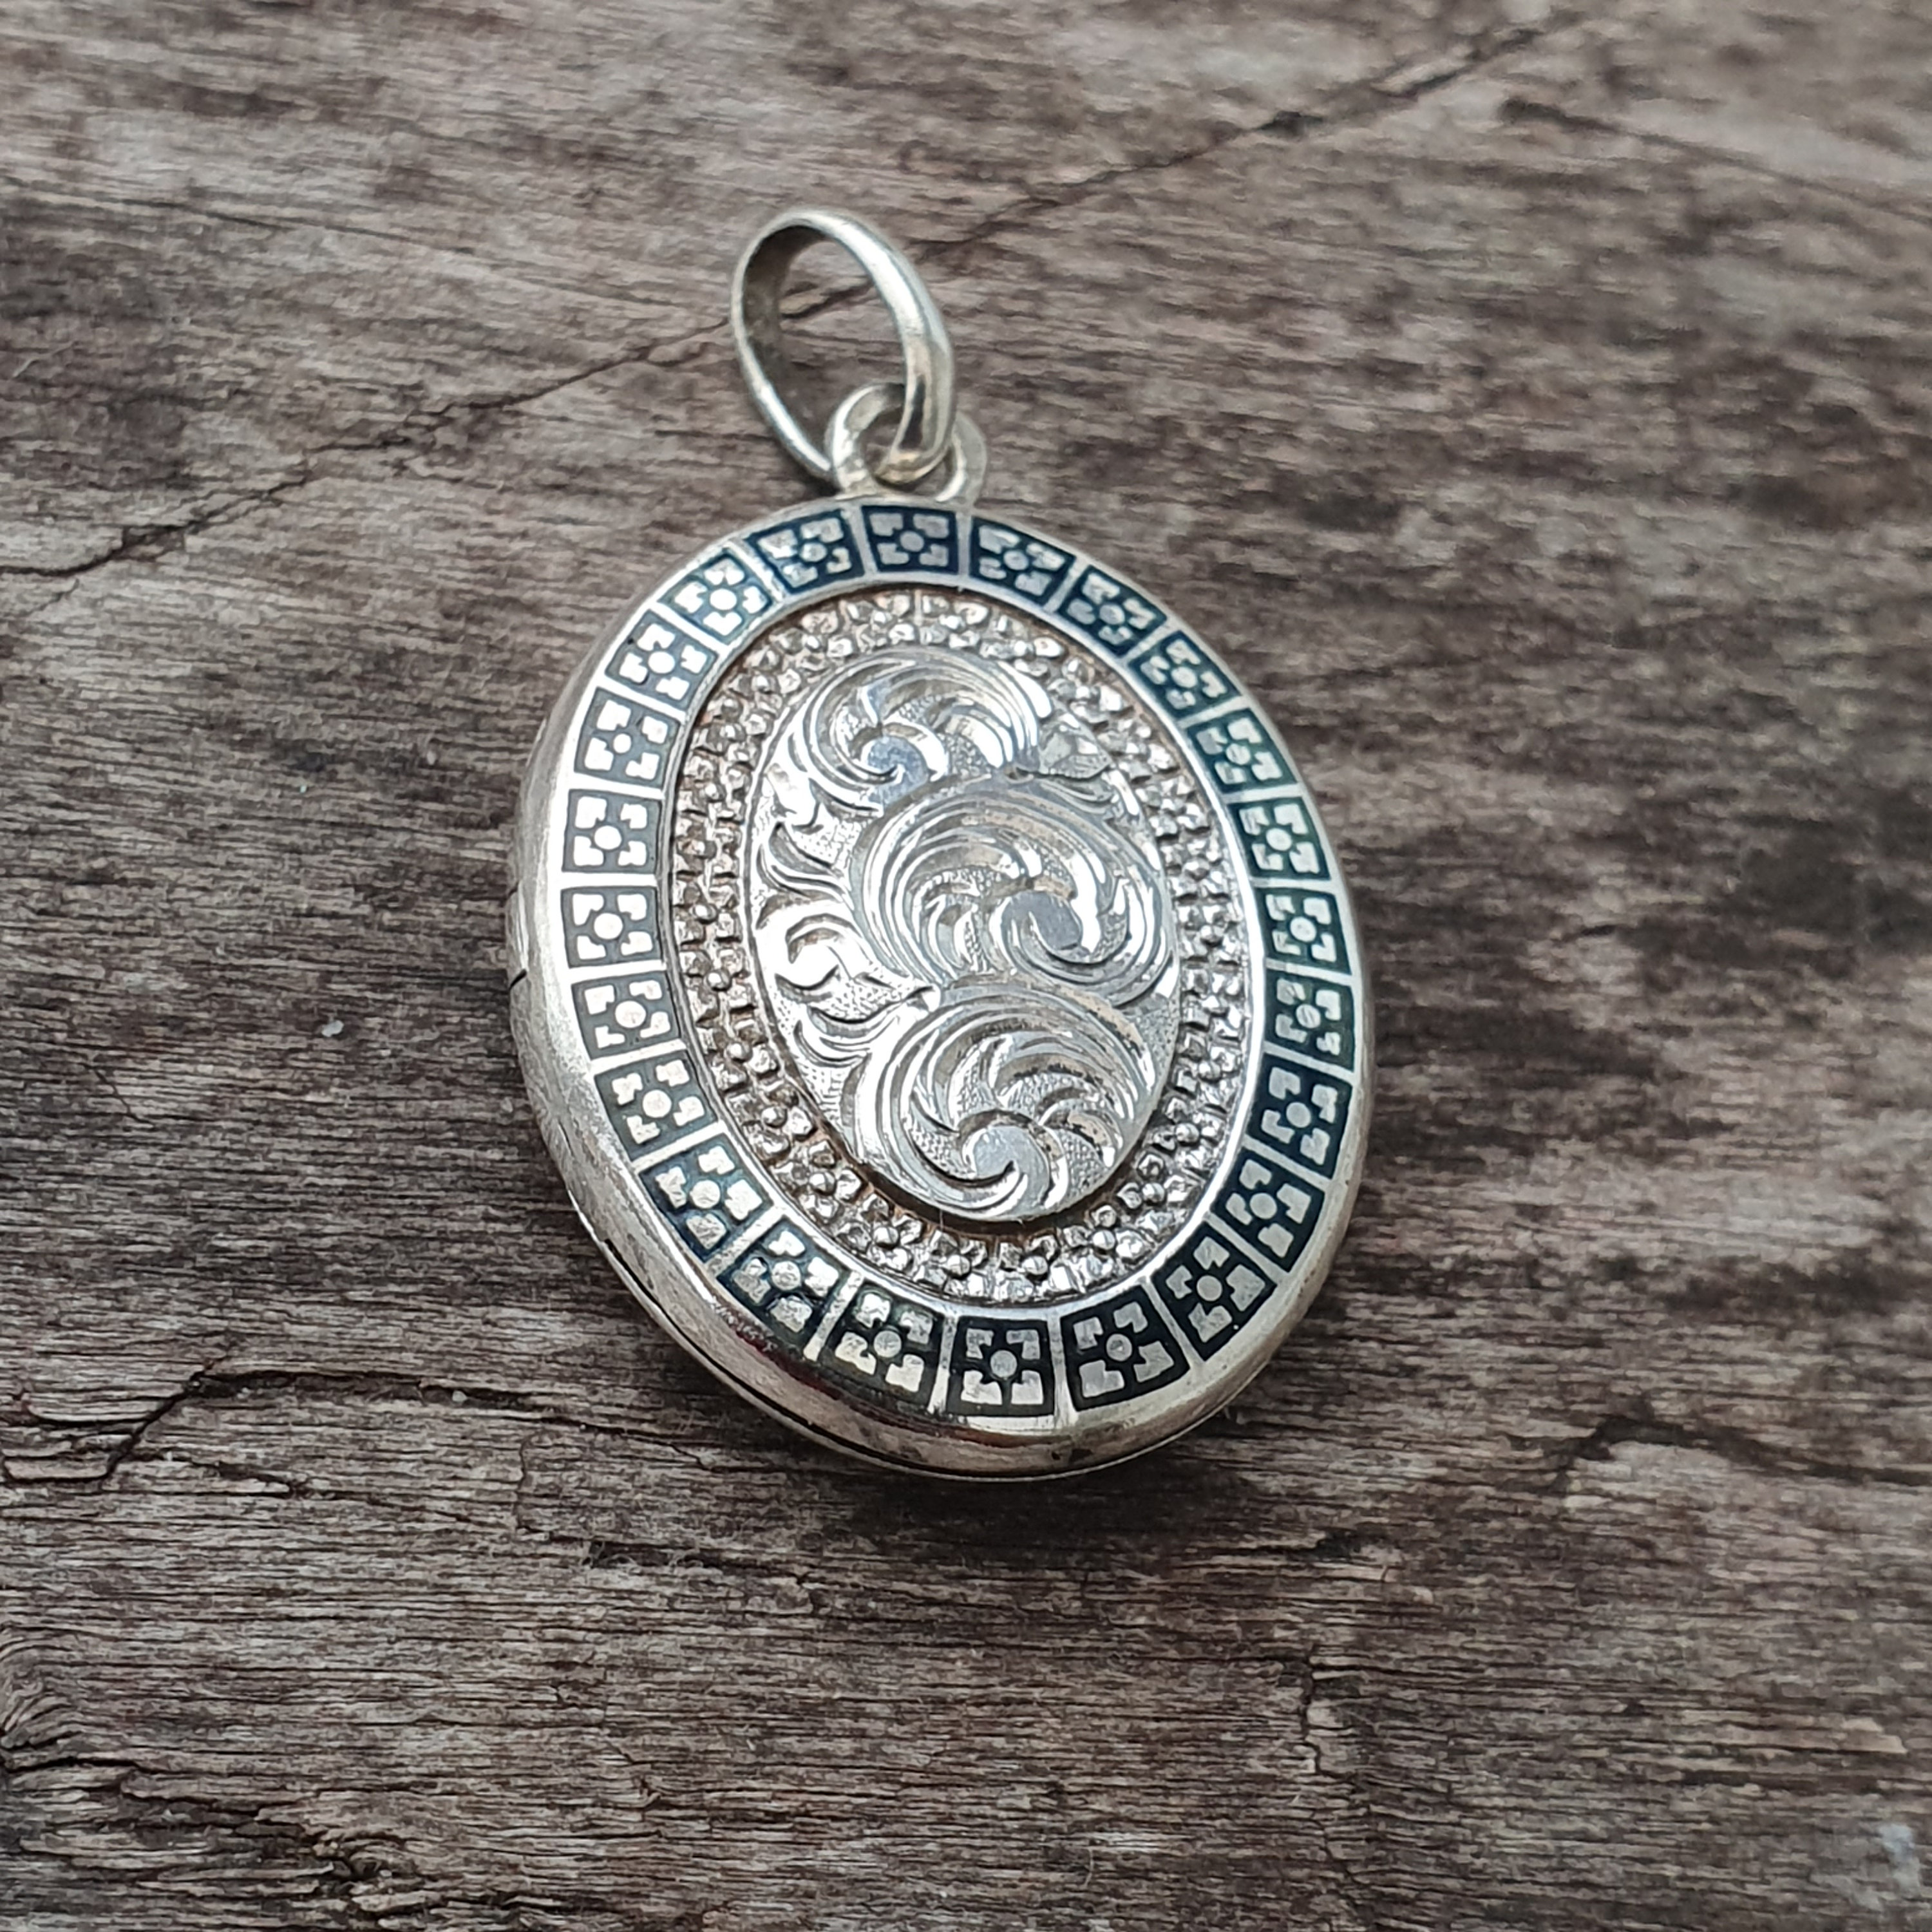 Silver Victorian Lockets: Antique Chased & Engraved Styles